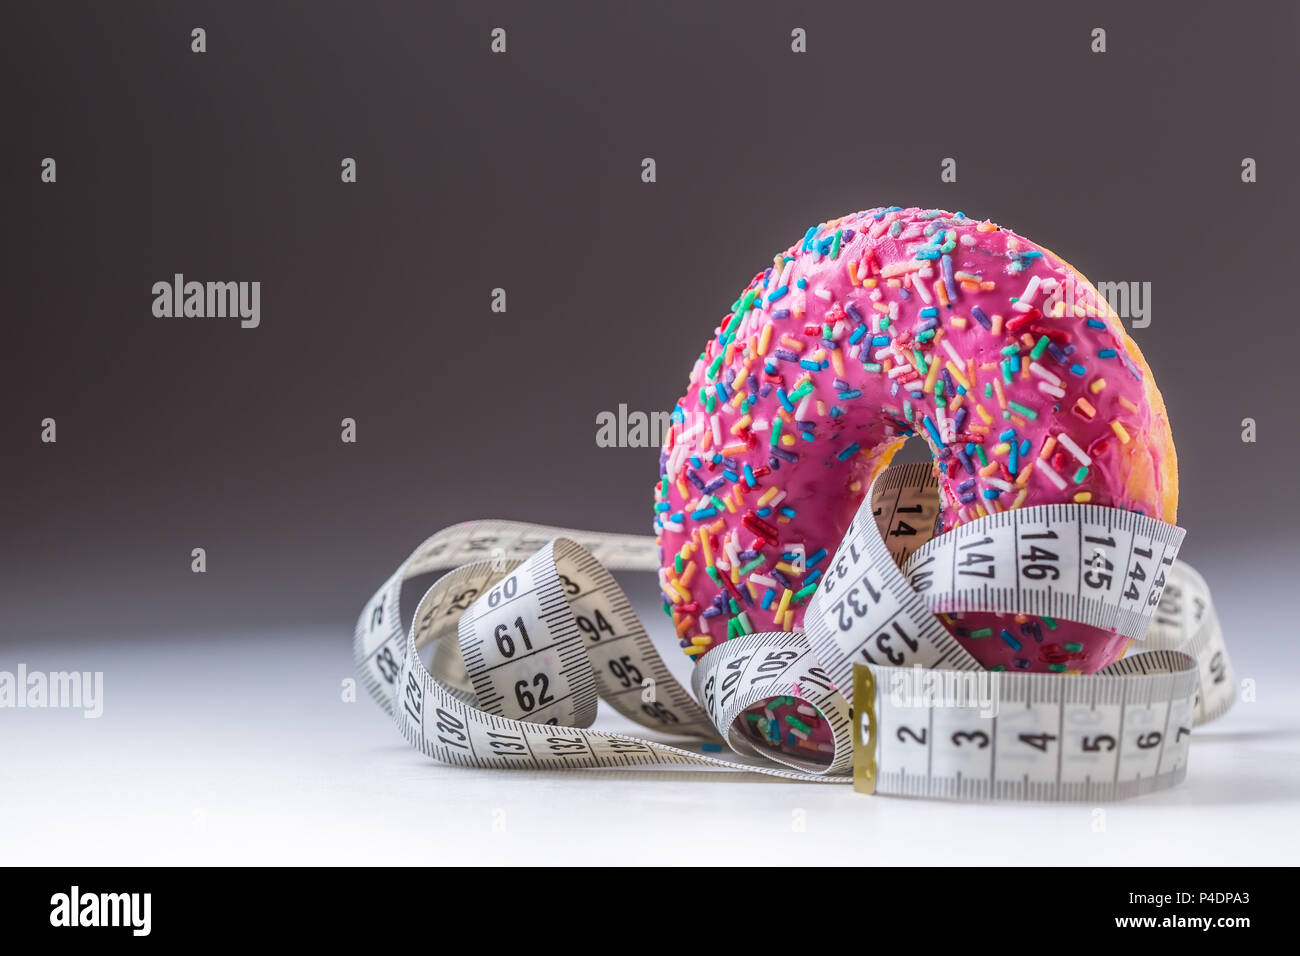 Close-up pink frosted donut with white tailor measure tape. Stock Photo